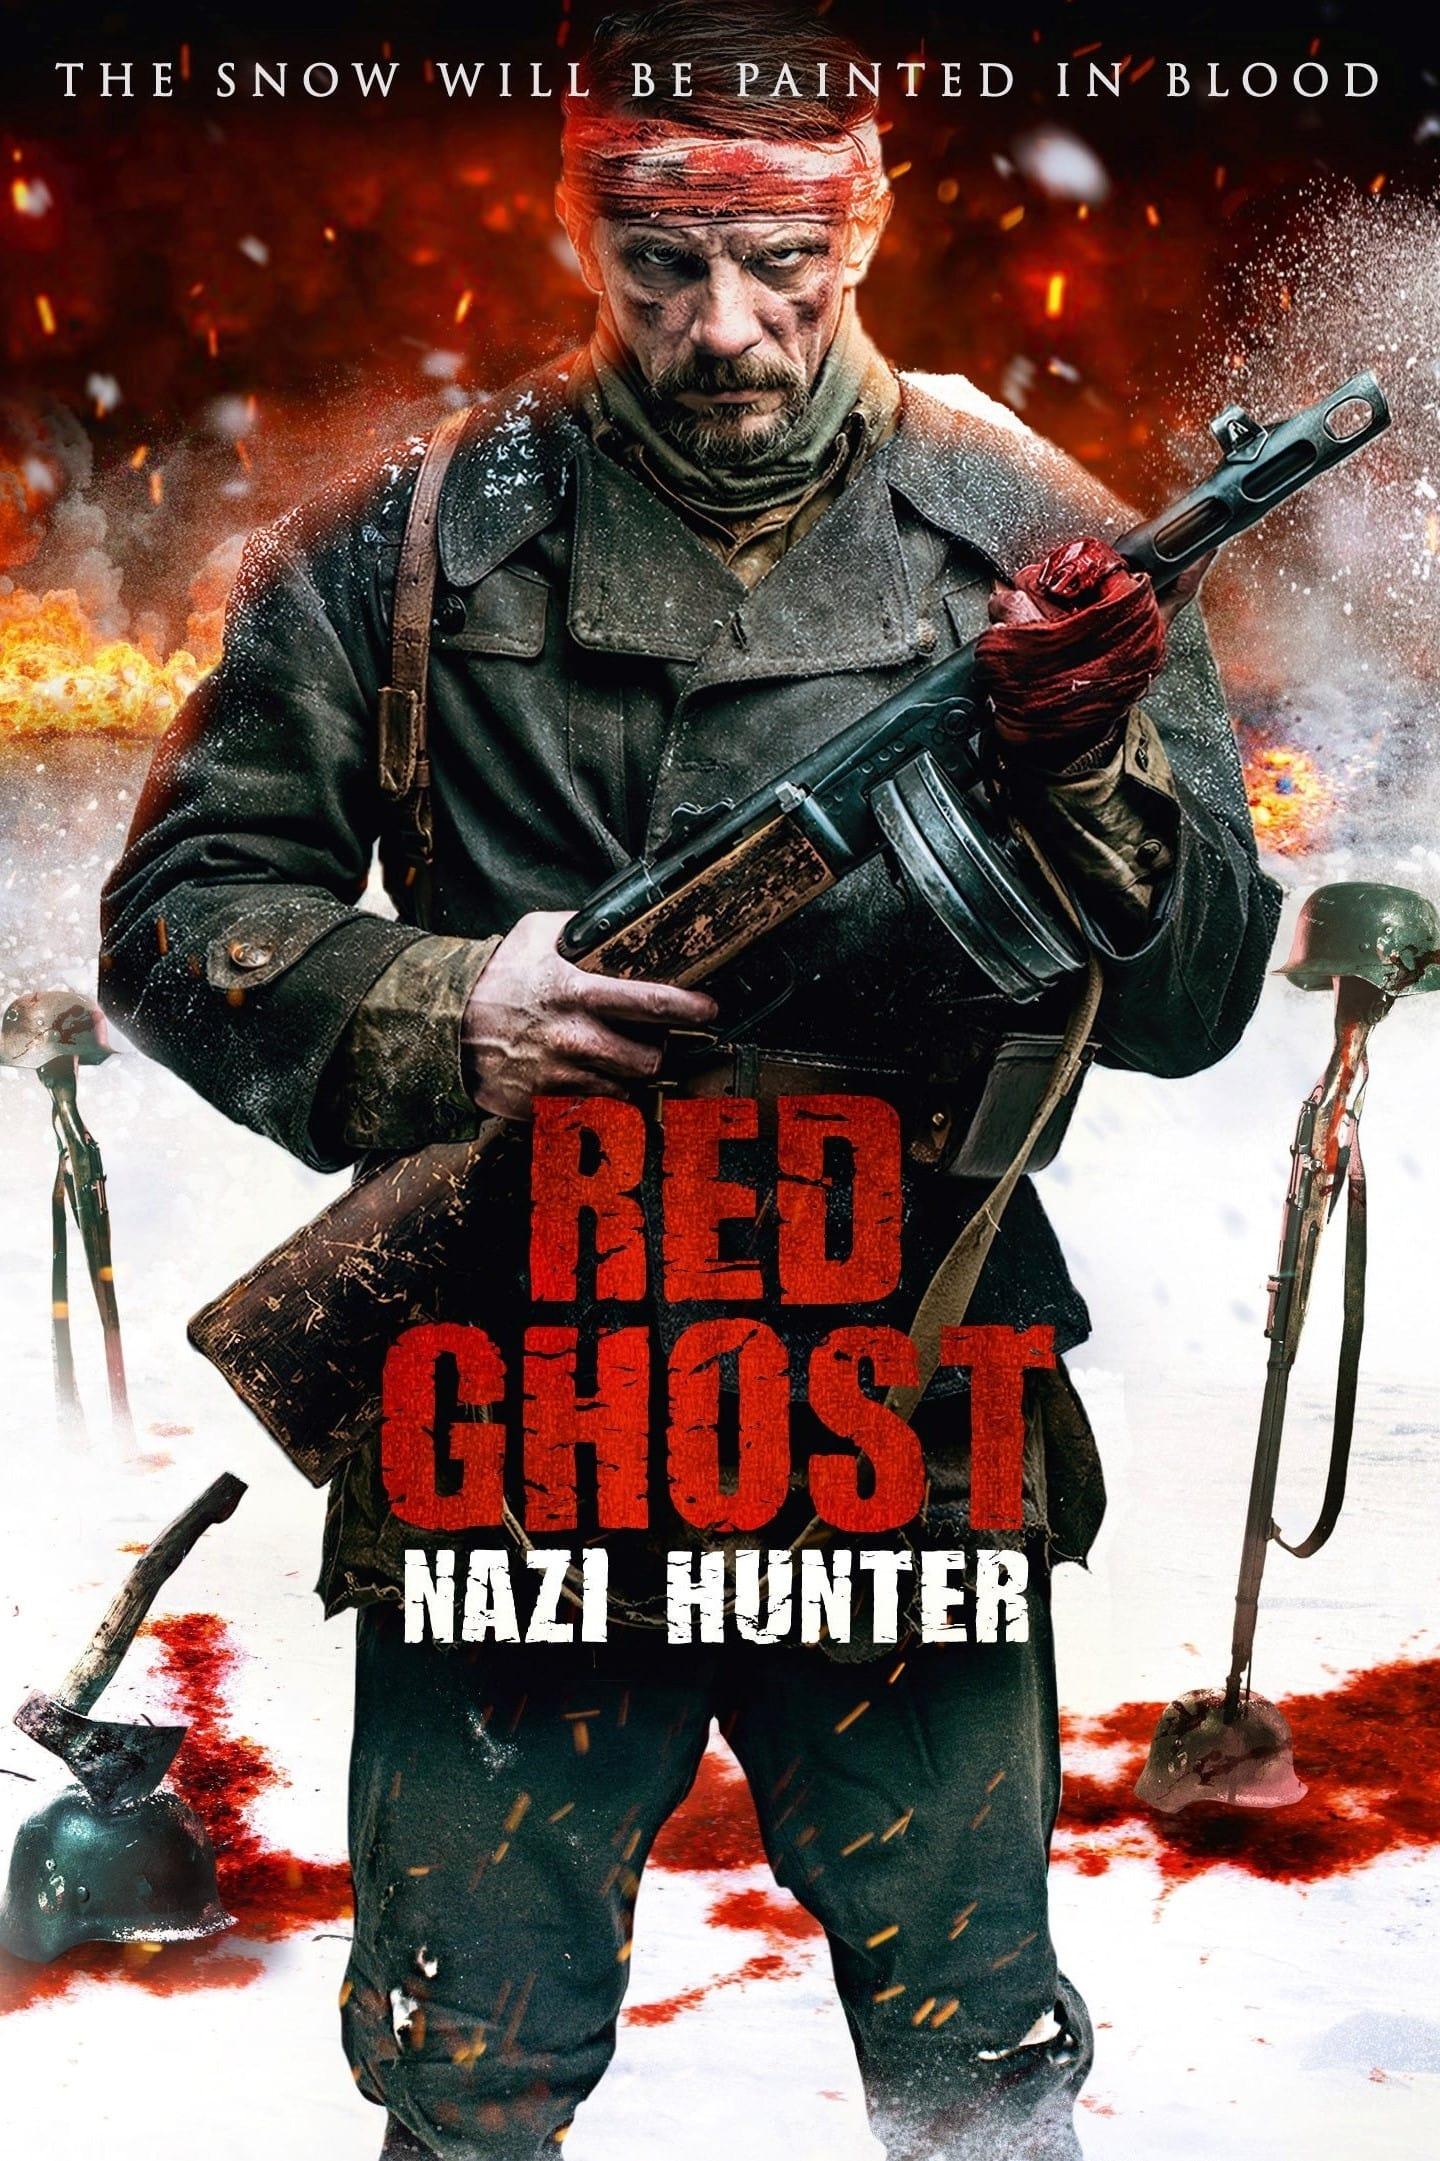 The Red Ghost poster